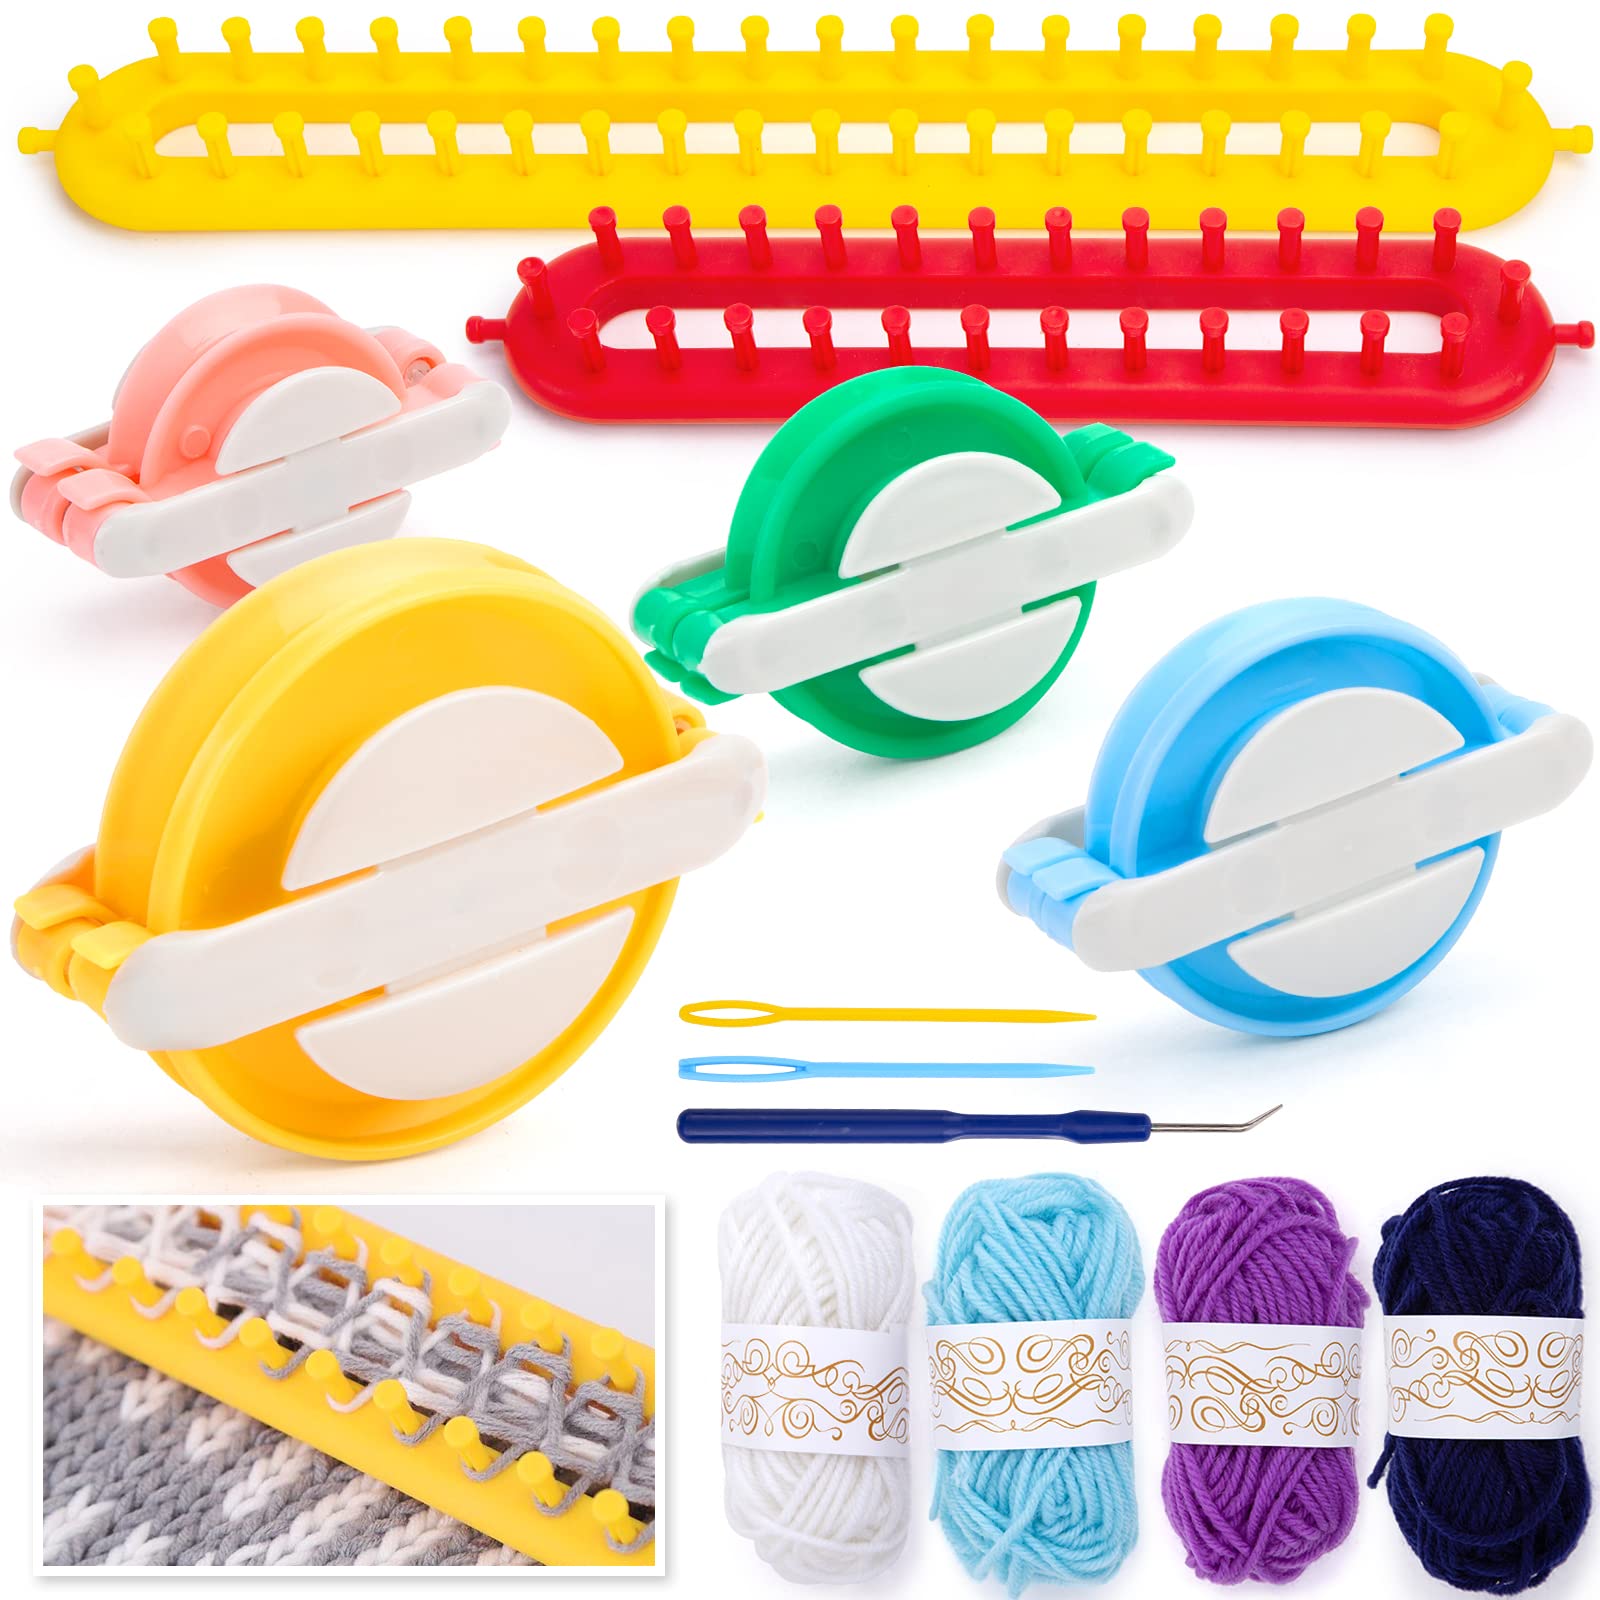 LOVEINUSA 13PCS Knitting Loom and Pompom Maker Set Rectangle Knitting Looms  Pompom Maker with Yarn Skeins Acrylic Knitting Crochet Supplies for  Beginners Hat Scarf Shawl Sweater Sock